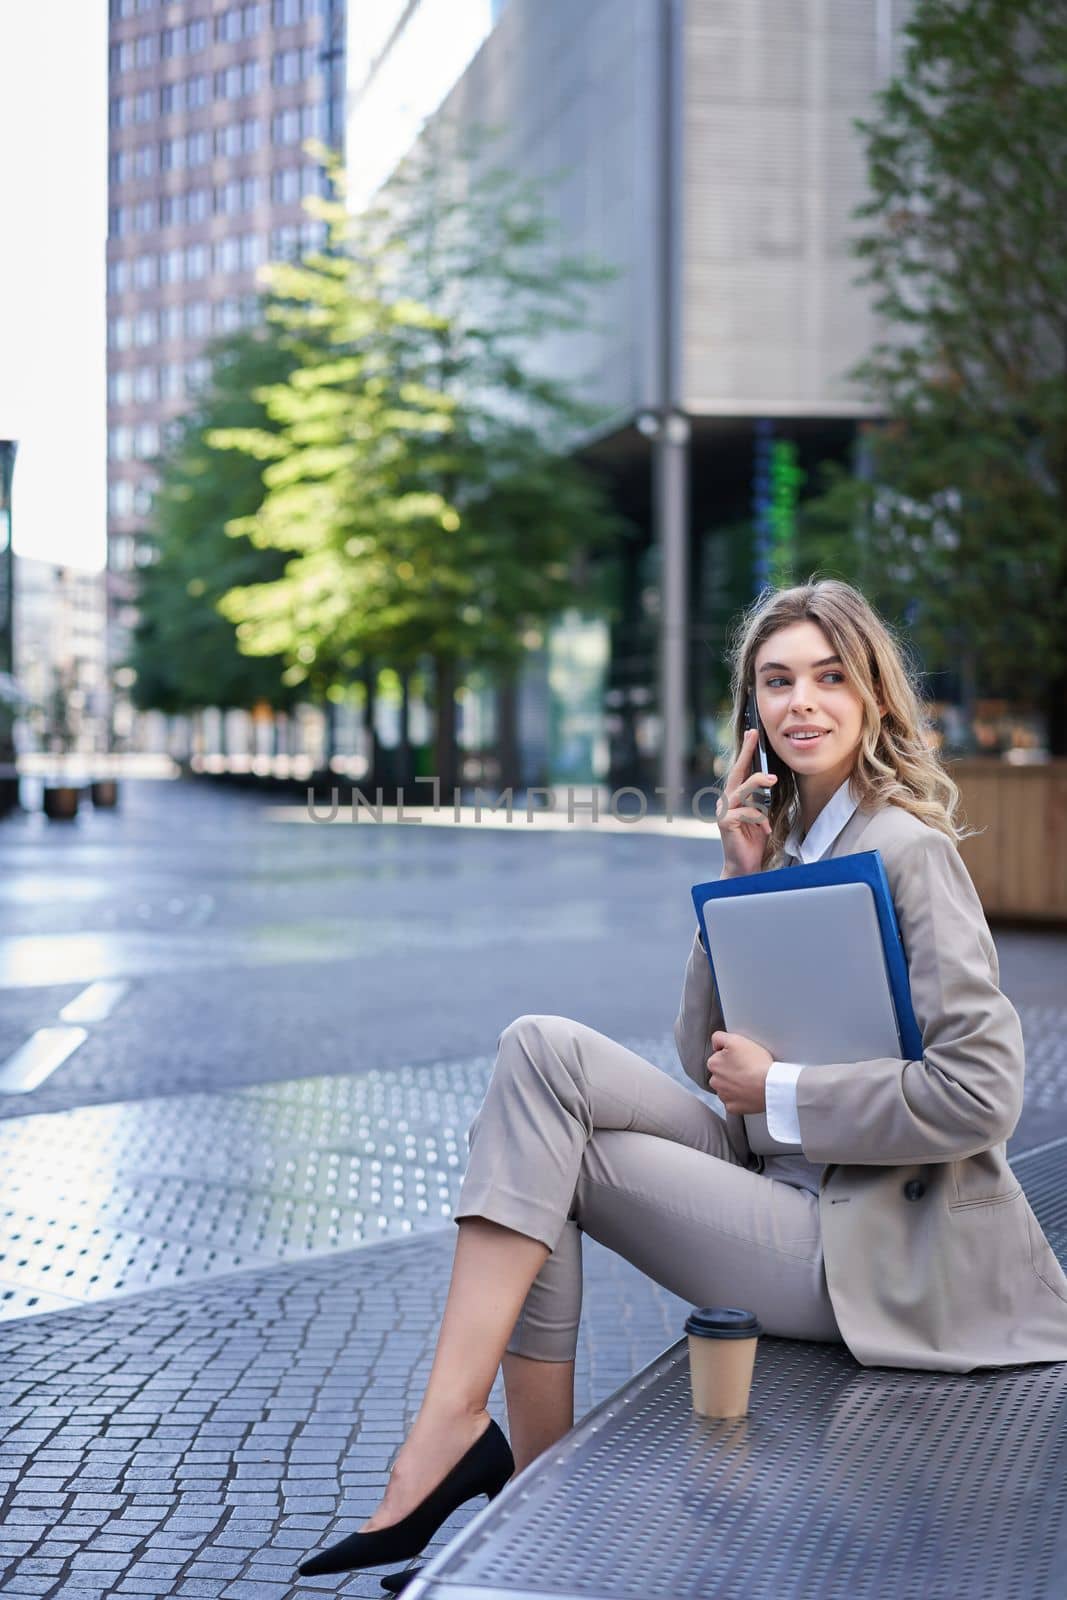 Vertical shot of young woman sitting near office building, holding laptop and folders with work documents, calling someone on mobile phone.